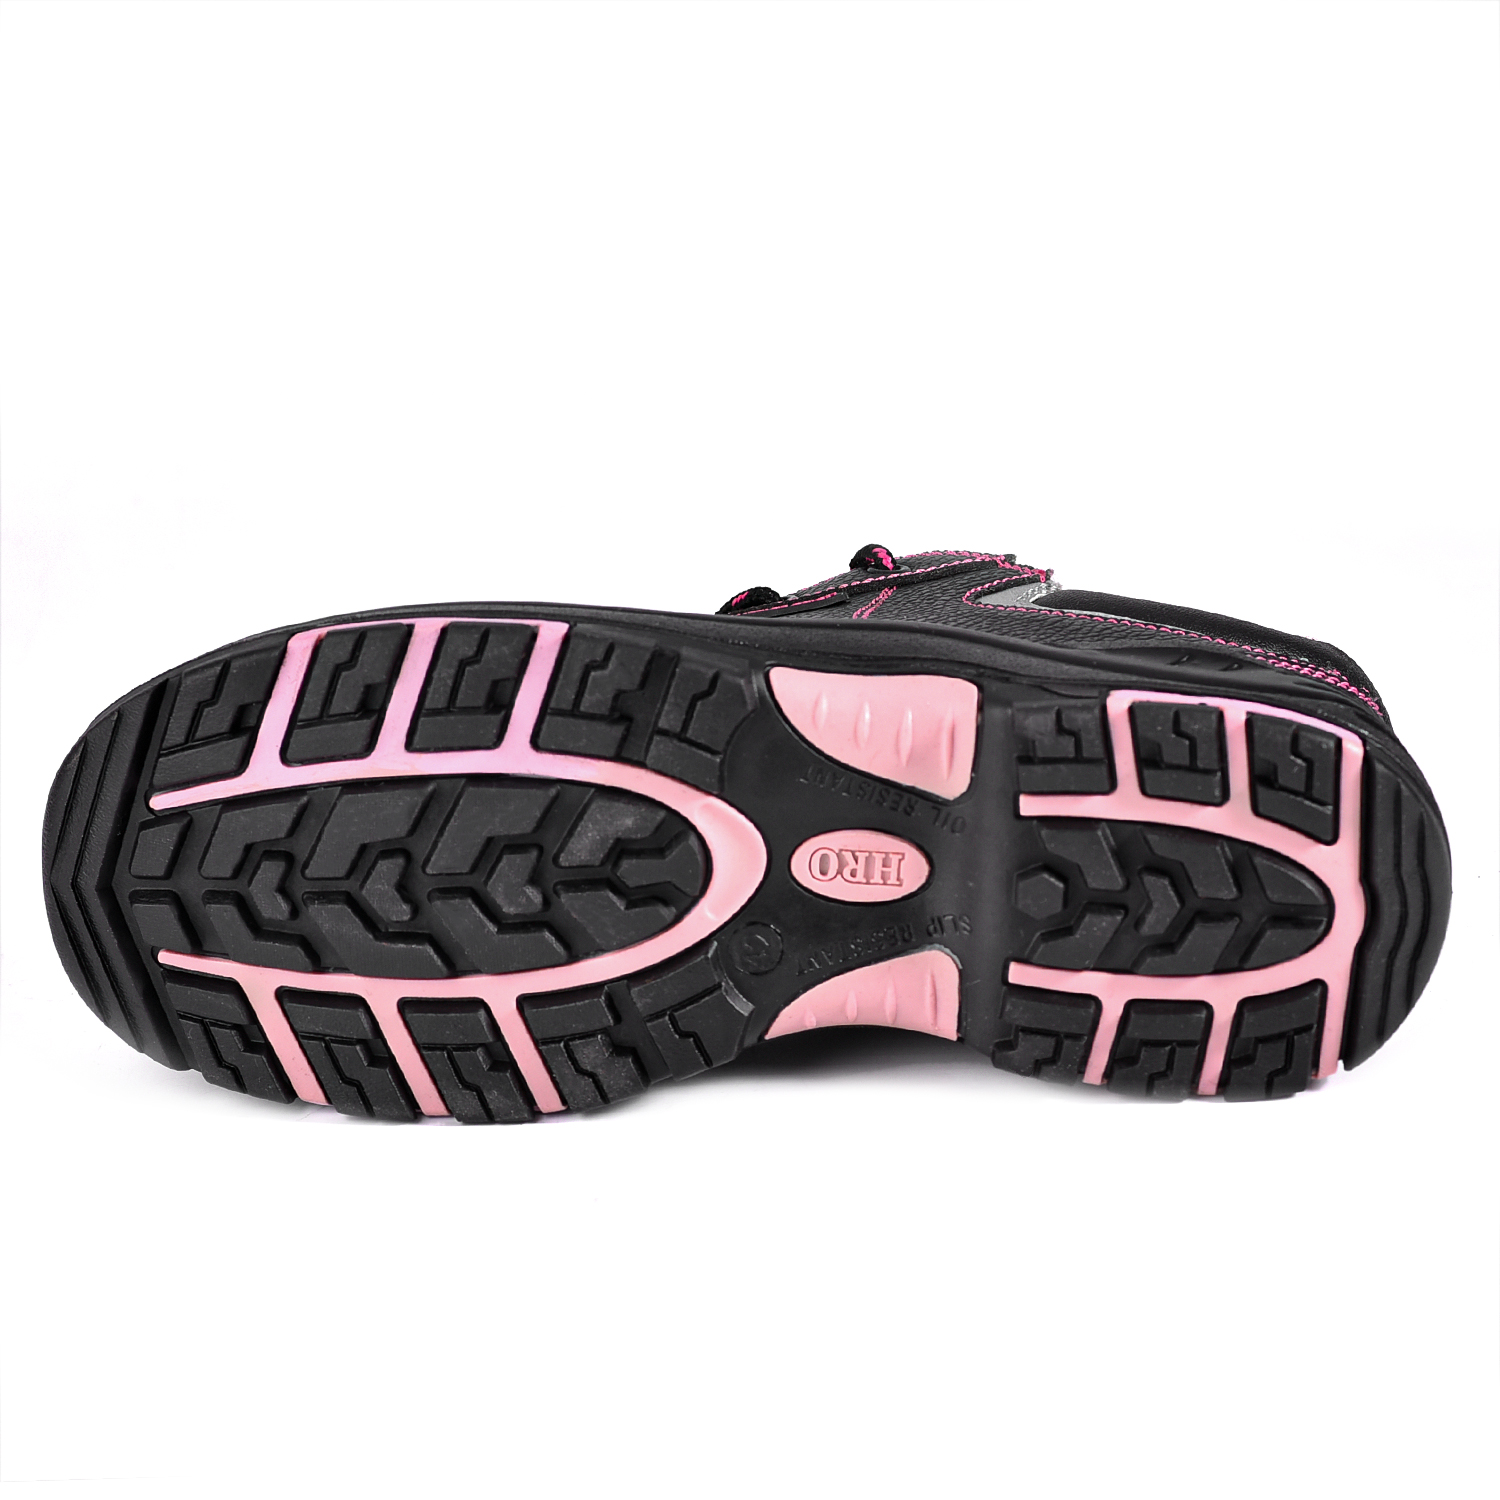 Steel Toe S3 Safety Shoes L-7147PINK